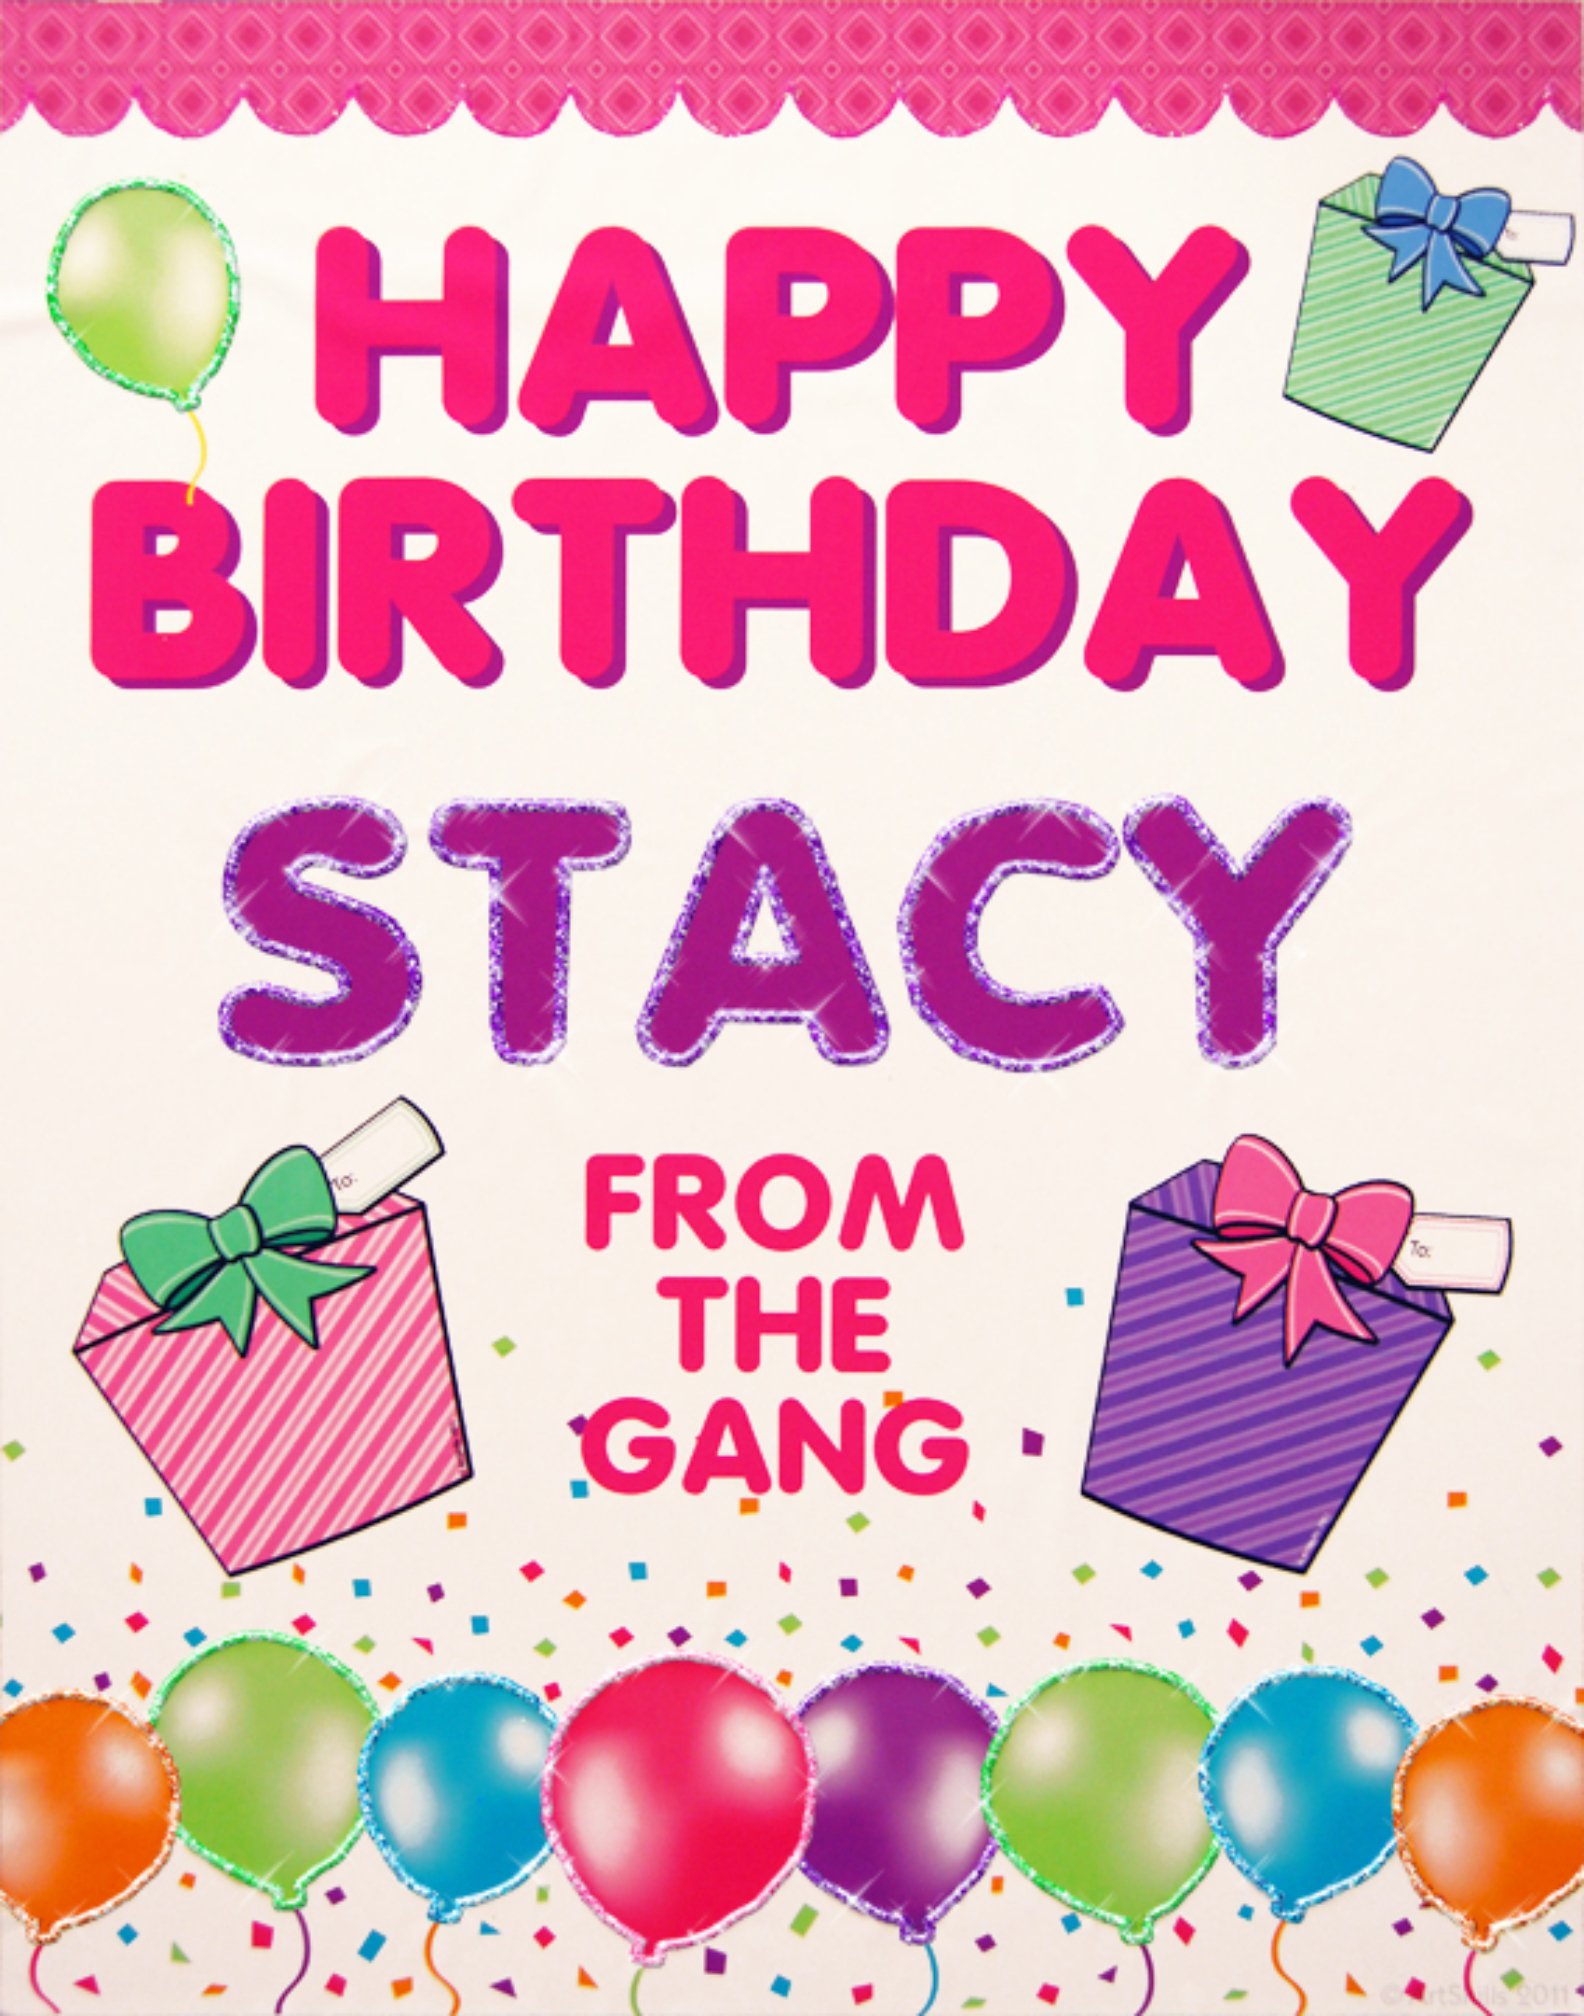 free-birthday-poster-download-free-birthday-poster-png-images-free-cliparts-on-clipart-library